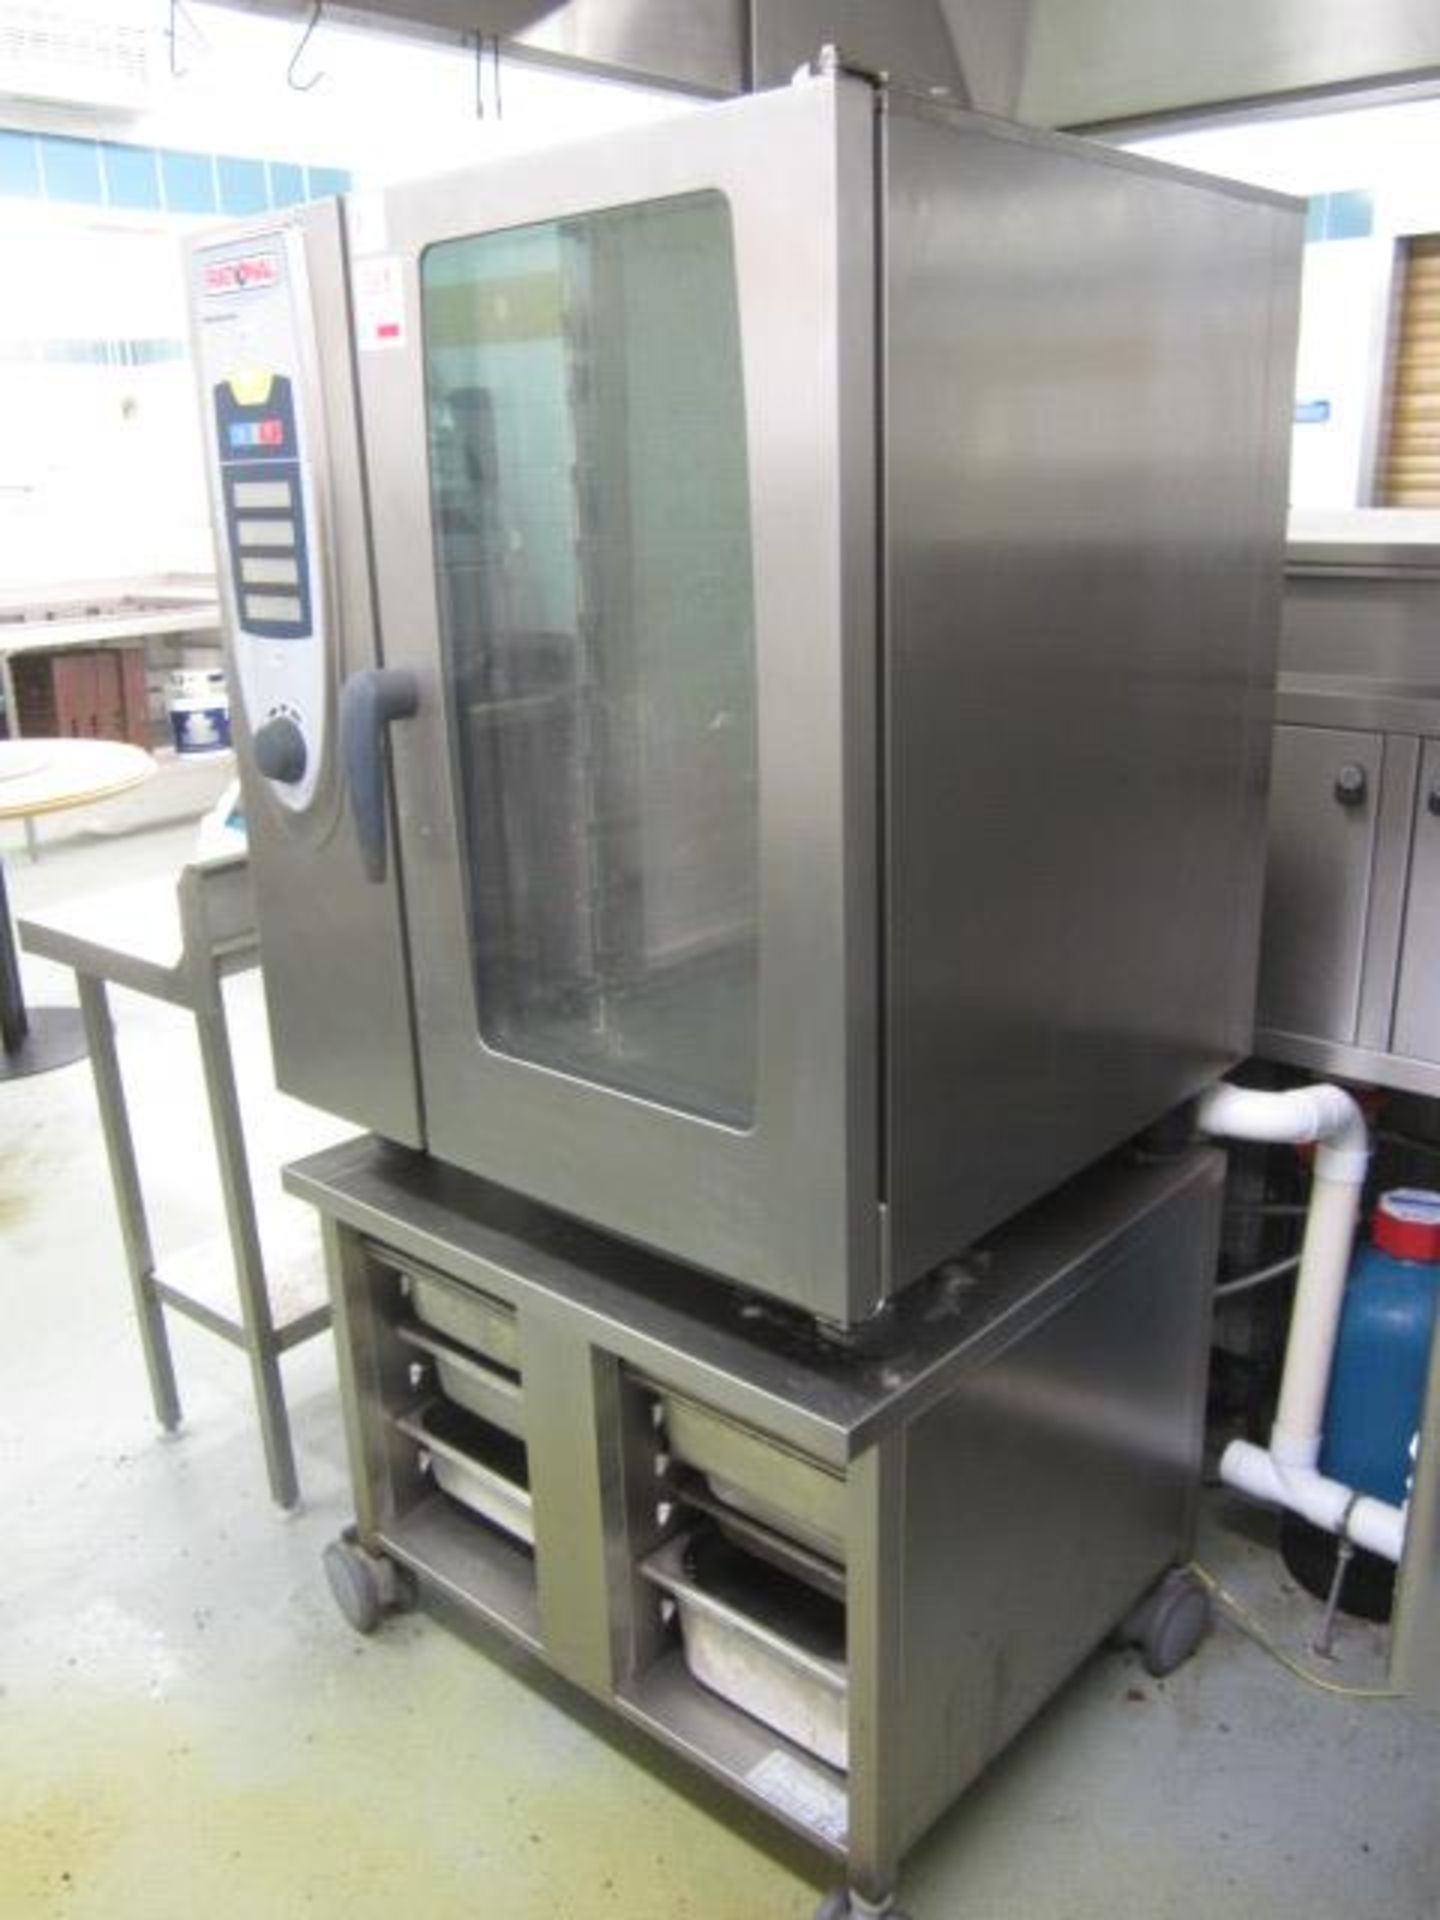 Rational stainless steel shelf cooker centre, model SC101, serial no. AC400/50-60, mounted on - Image 2 of 5